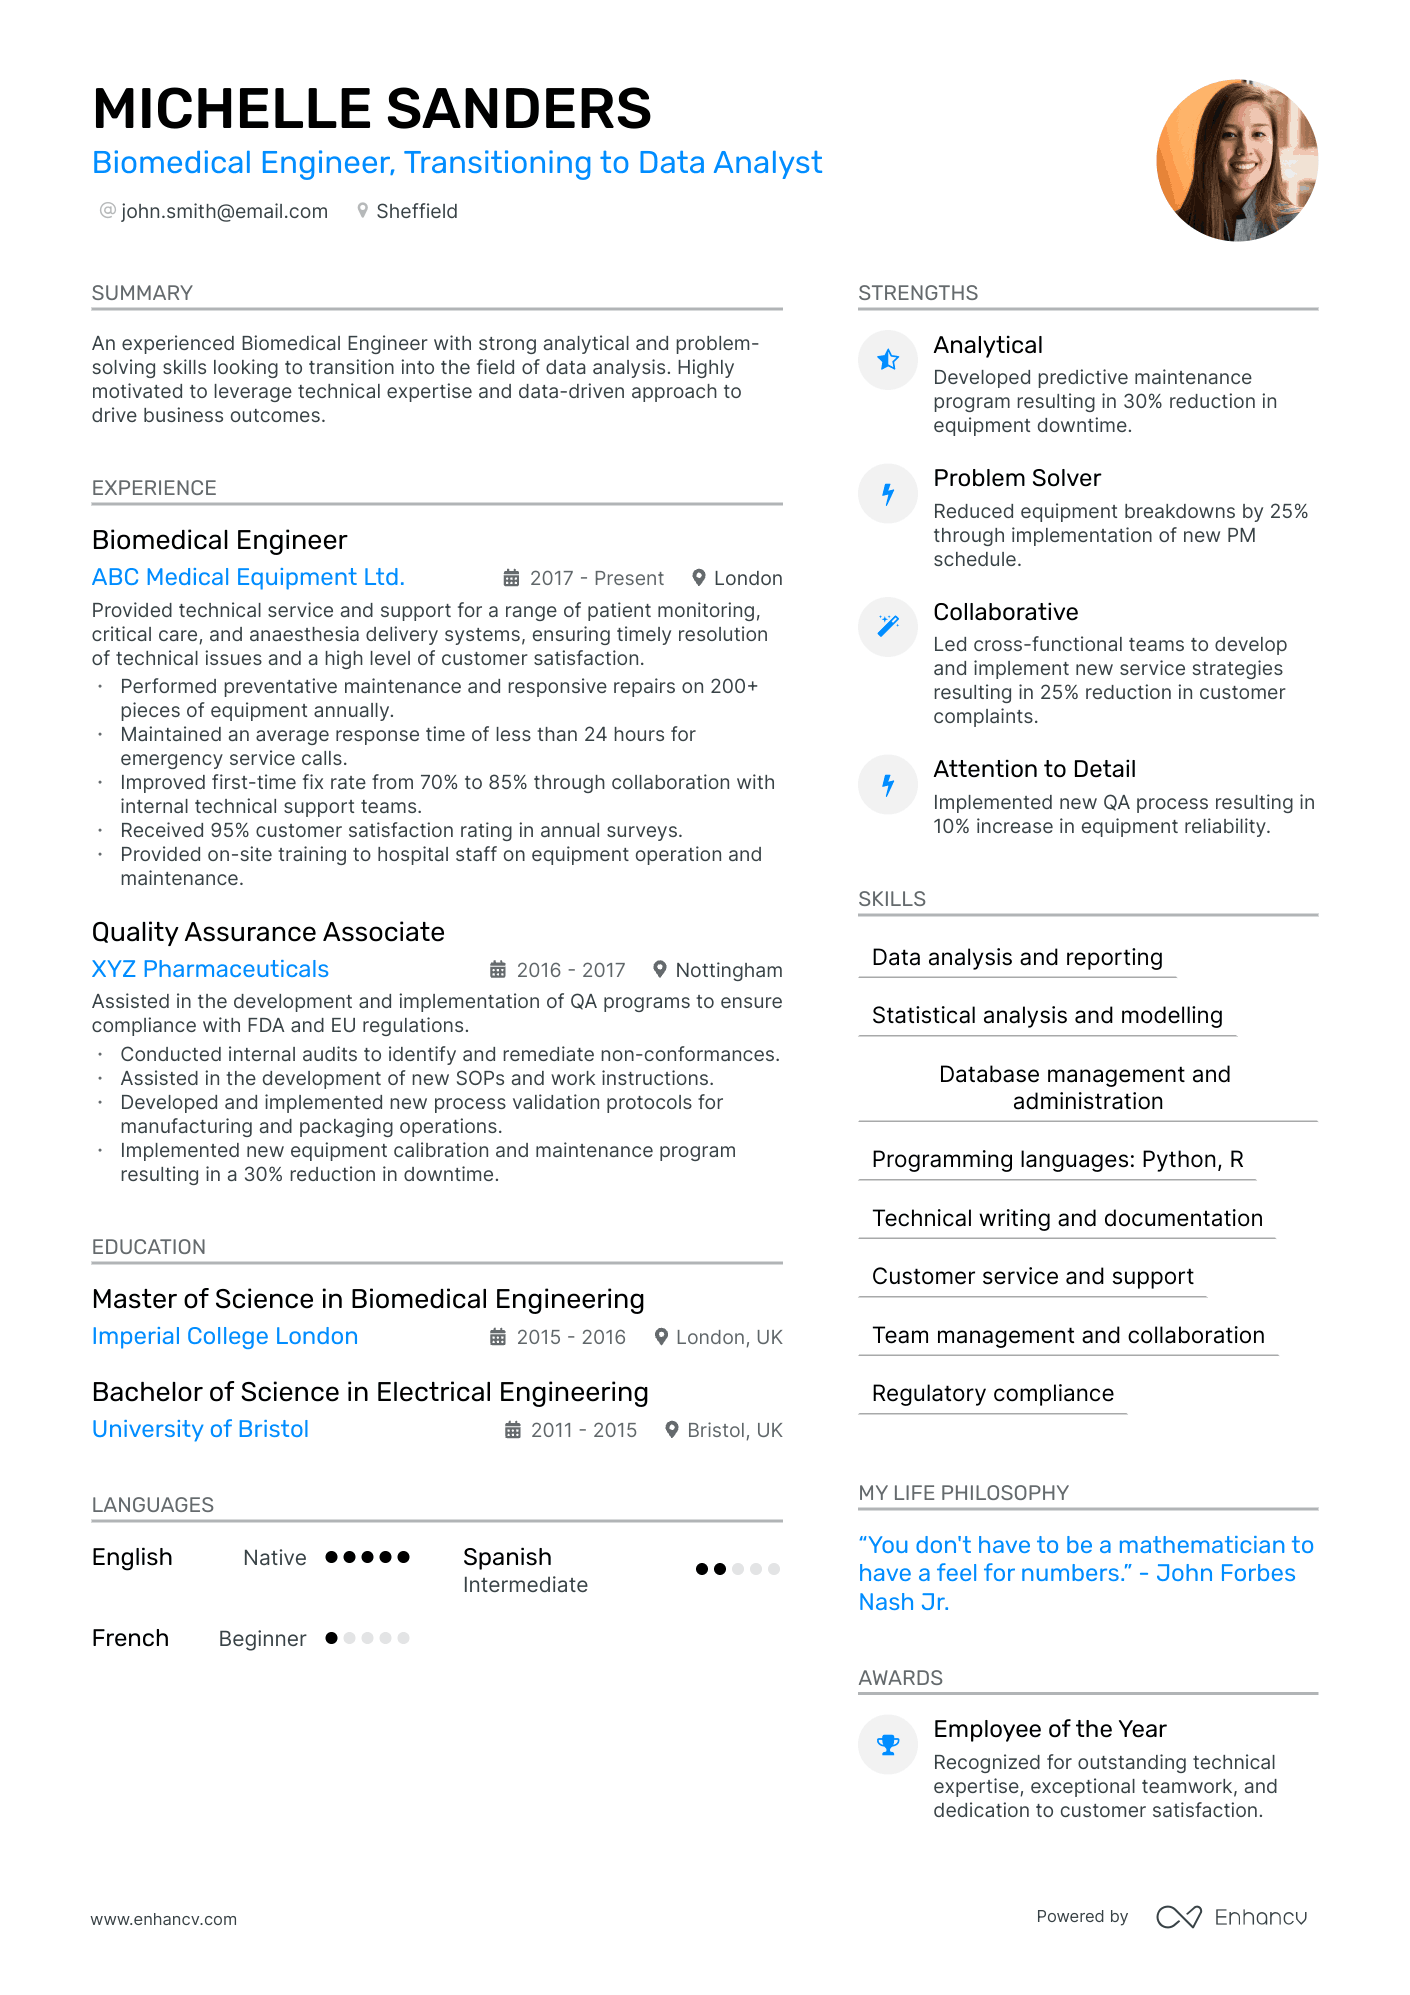 Biomedical Engineer, Transitioning to Data Analyst CV example